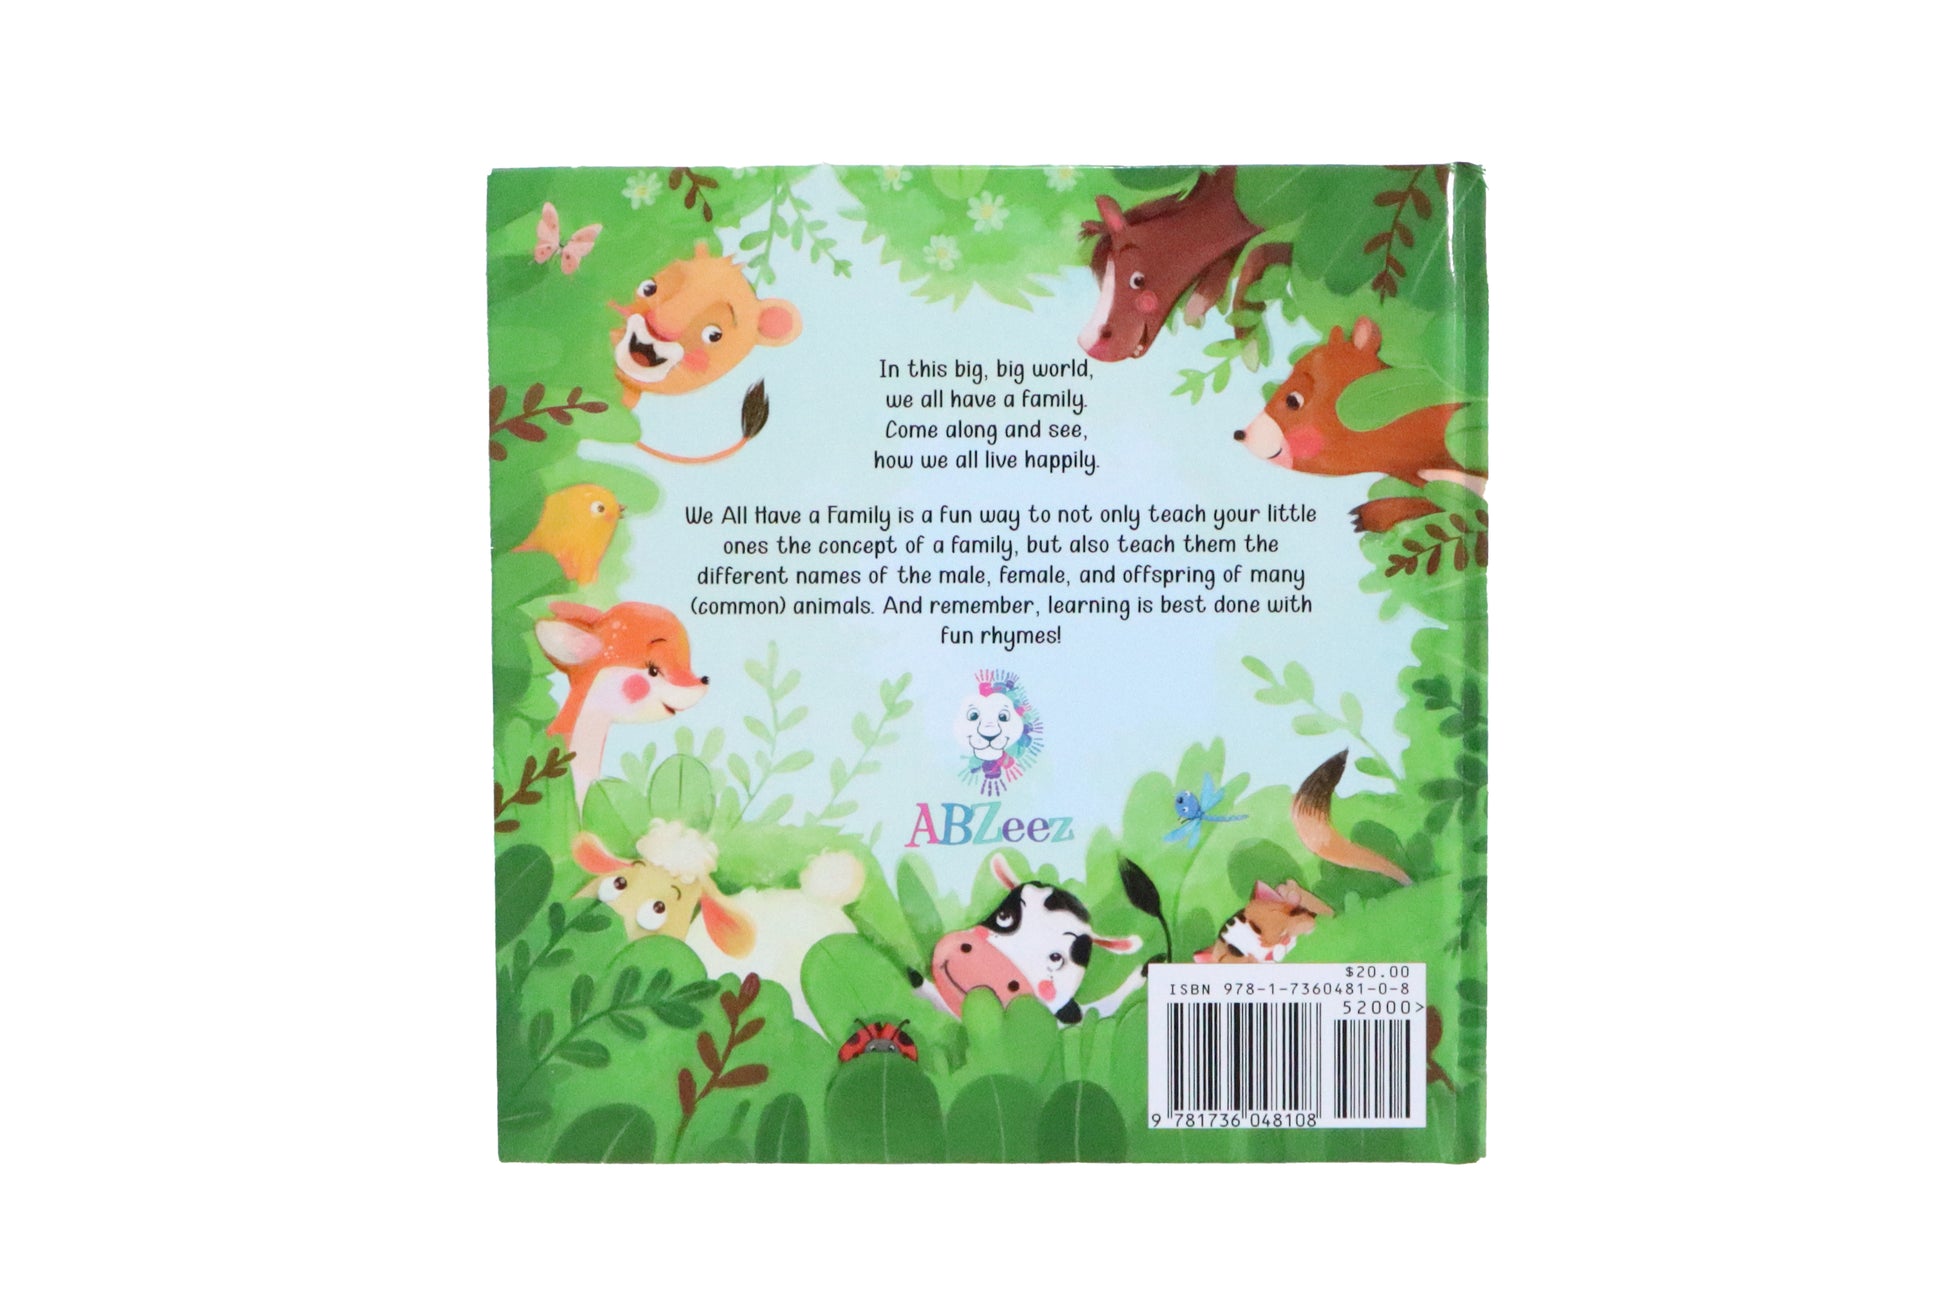 we all have a family kids story books  rajaeen